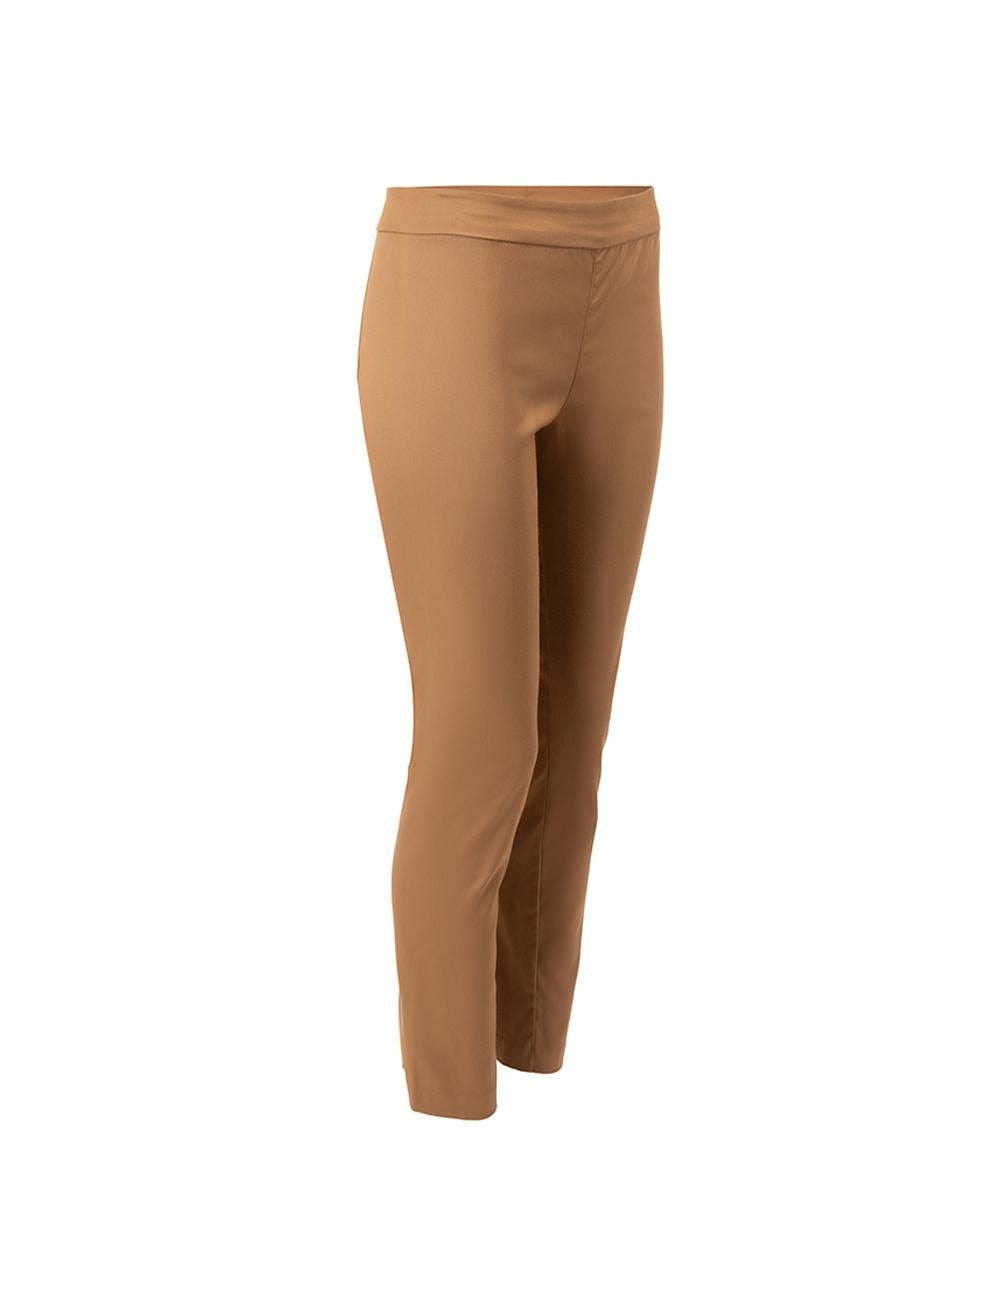 CONDITION is Very good. Minimal wear to trousers is evident. Some loose threads to internal waistline can be seen on this used The Row designer resale item. 



Details


Brown

Cotton

Straight leg trousers

Mid rise

Stretchy

Regular